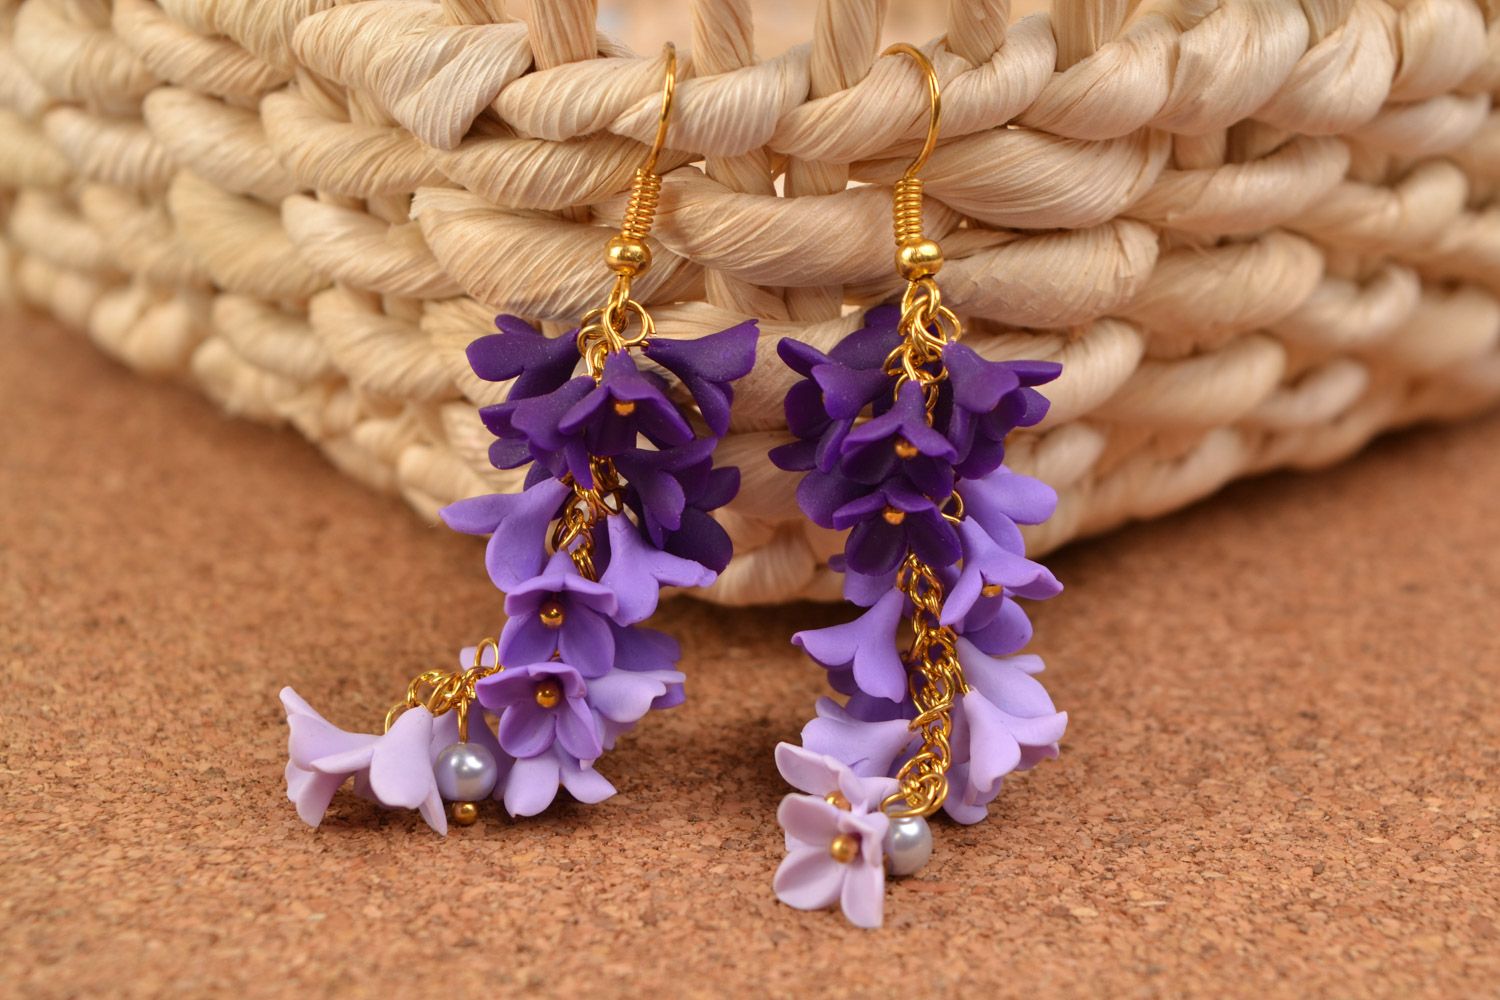 Homemade designer dangling earrings with polymer clay flowers in lilac shades photo 1